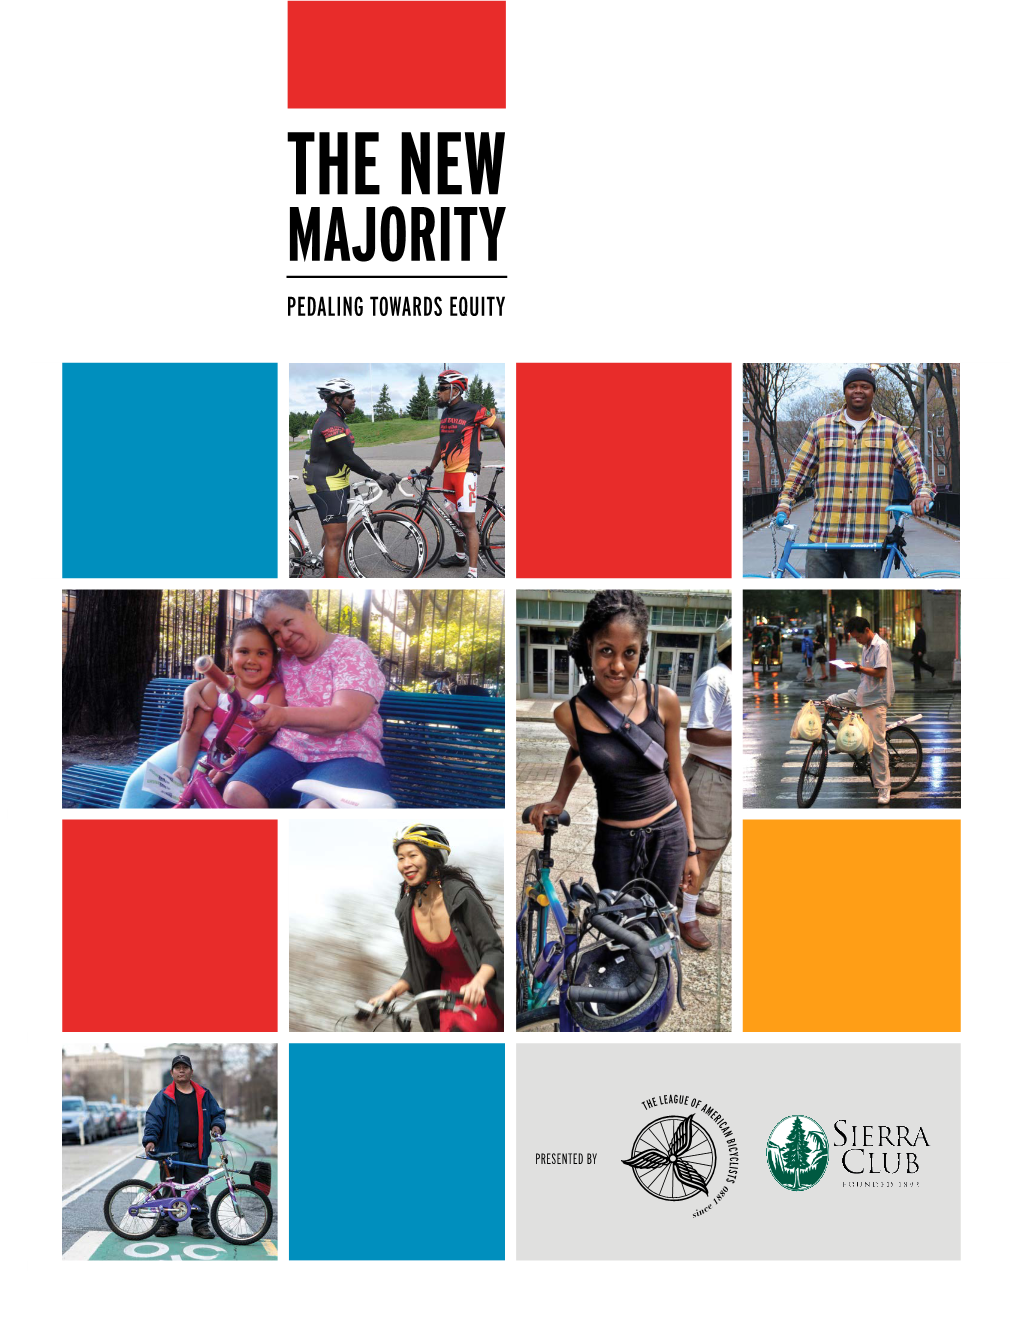 The New Majority: Pedaling Towards Equity